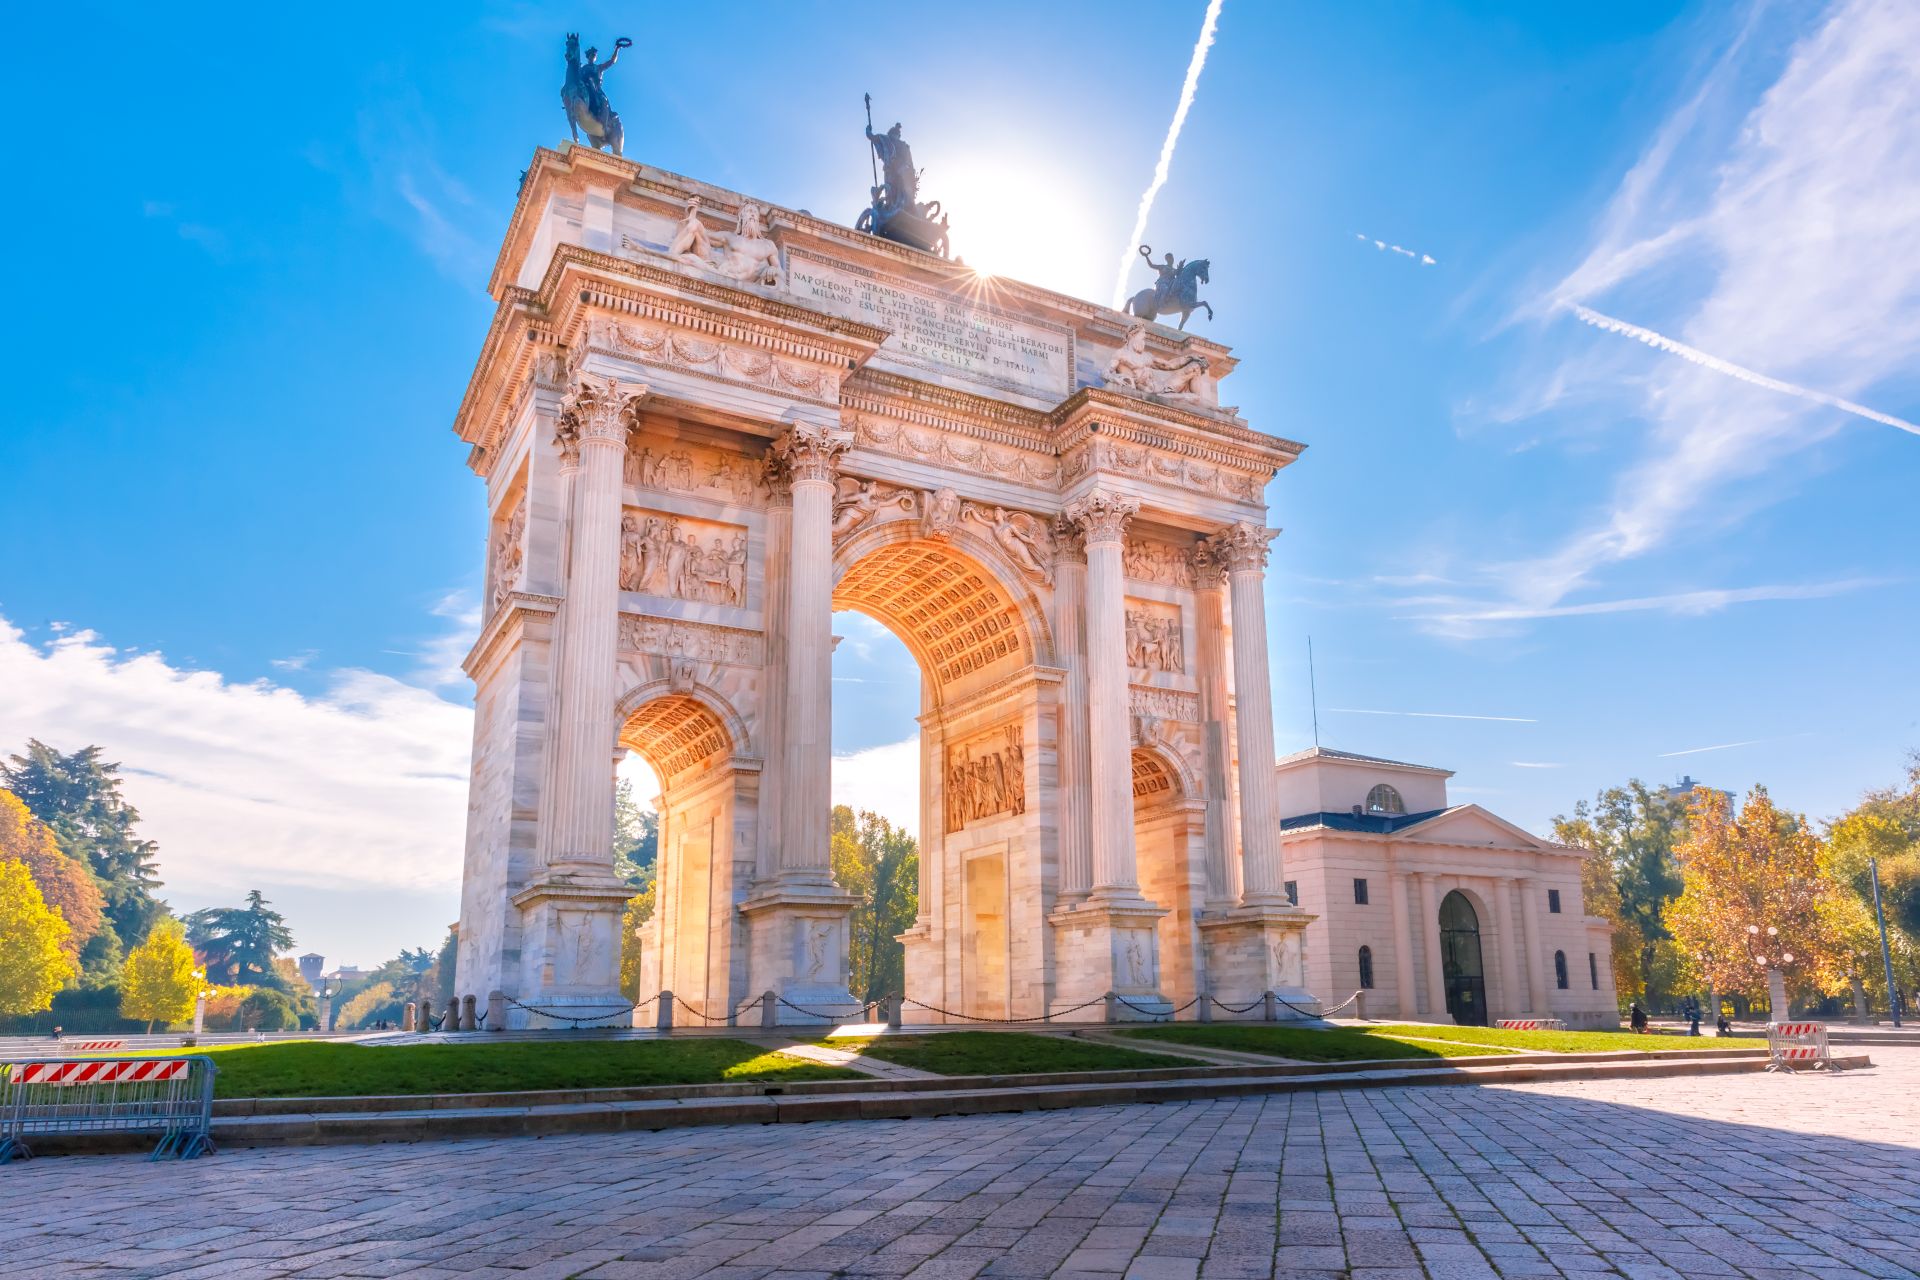 Arch of Peace, or Arco della Pace, city gate in the center of the old town